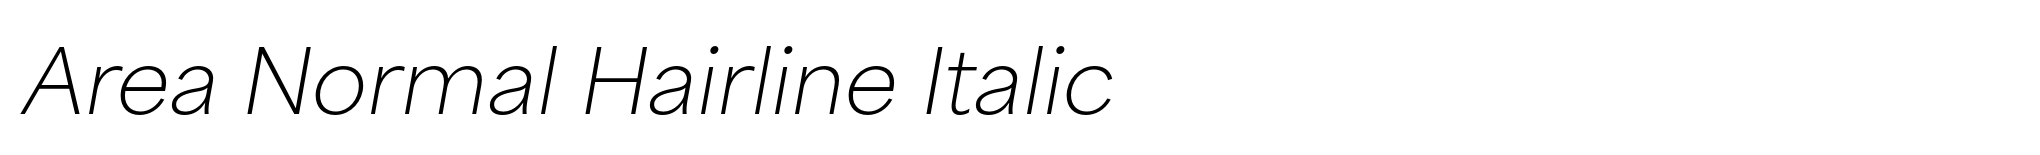 Area Normal Hairline Italic image